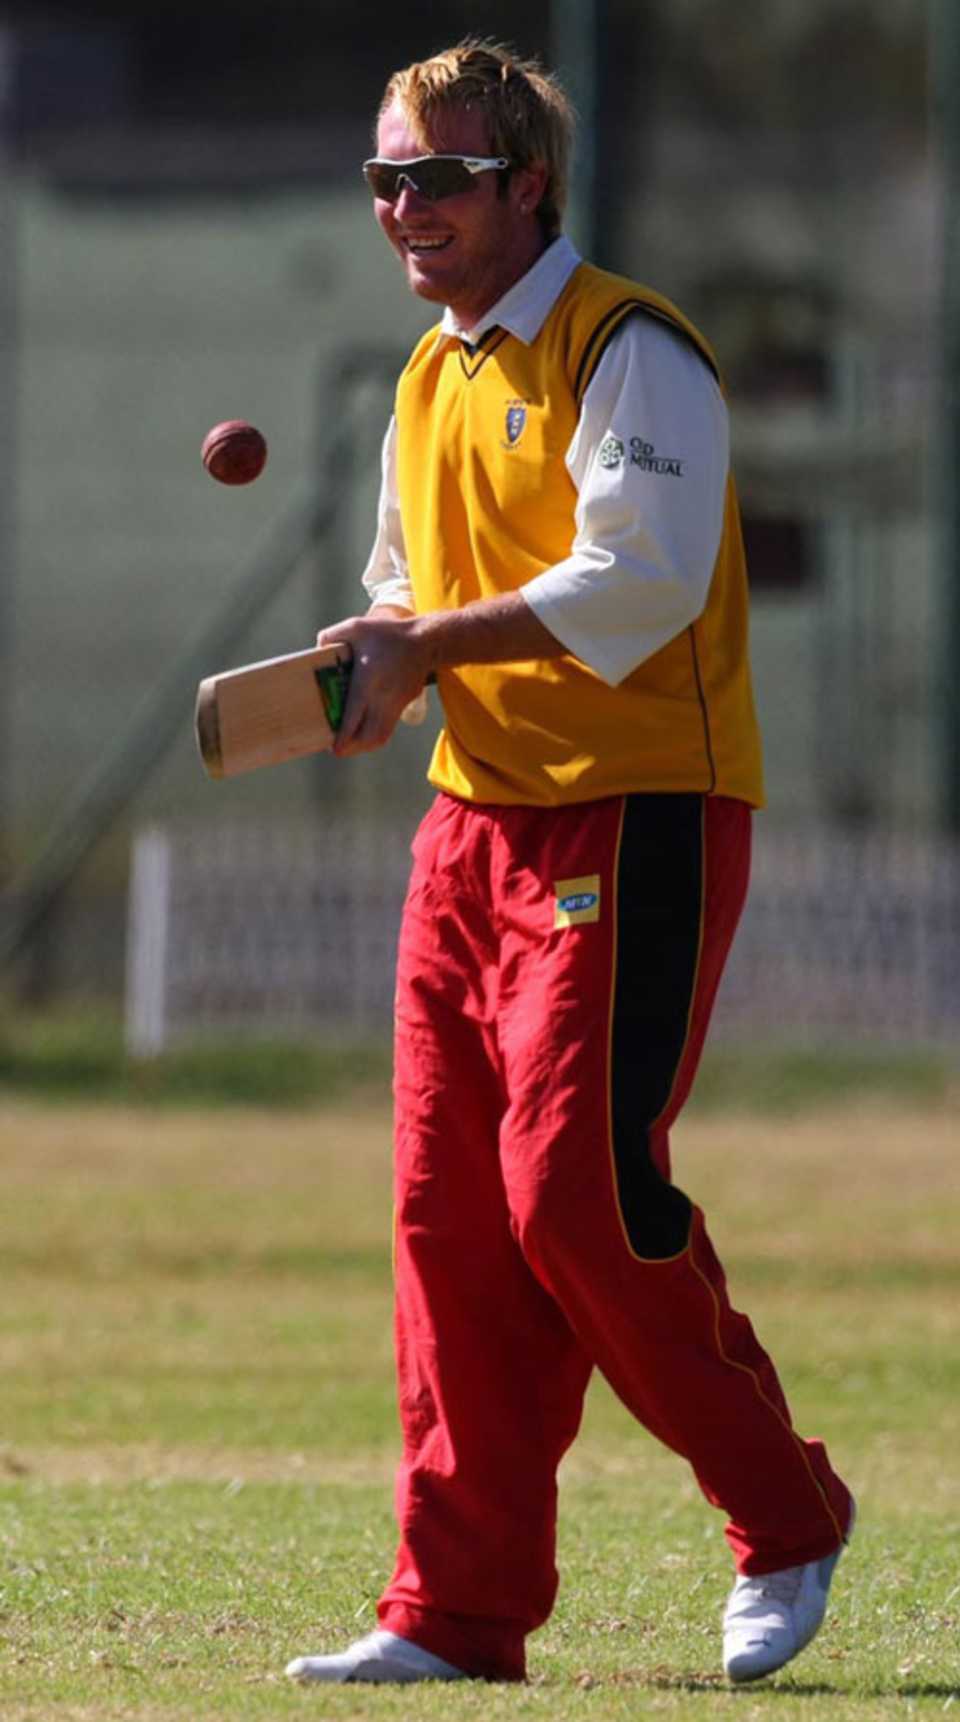 Brendan Taylor juggling with bat and ball, Easterns v Westerns, Logan Cup, Harare Sports Club, April 24, 2009